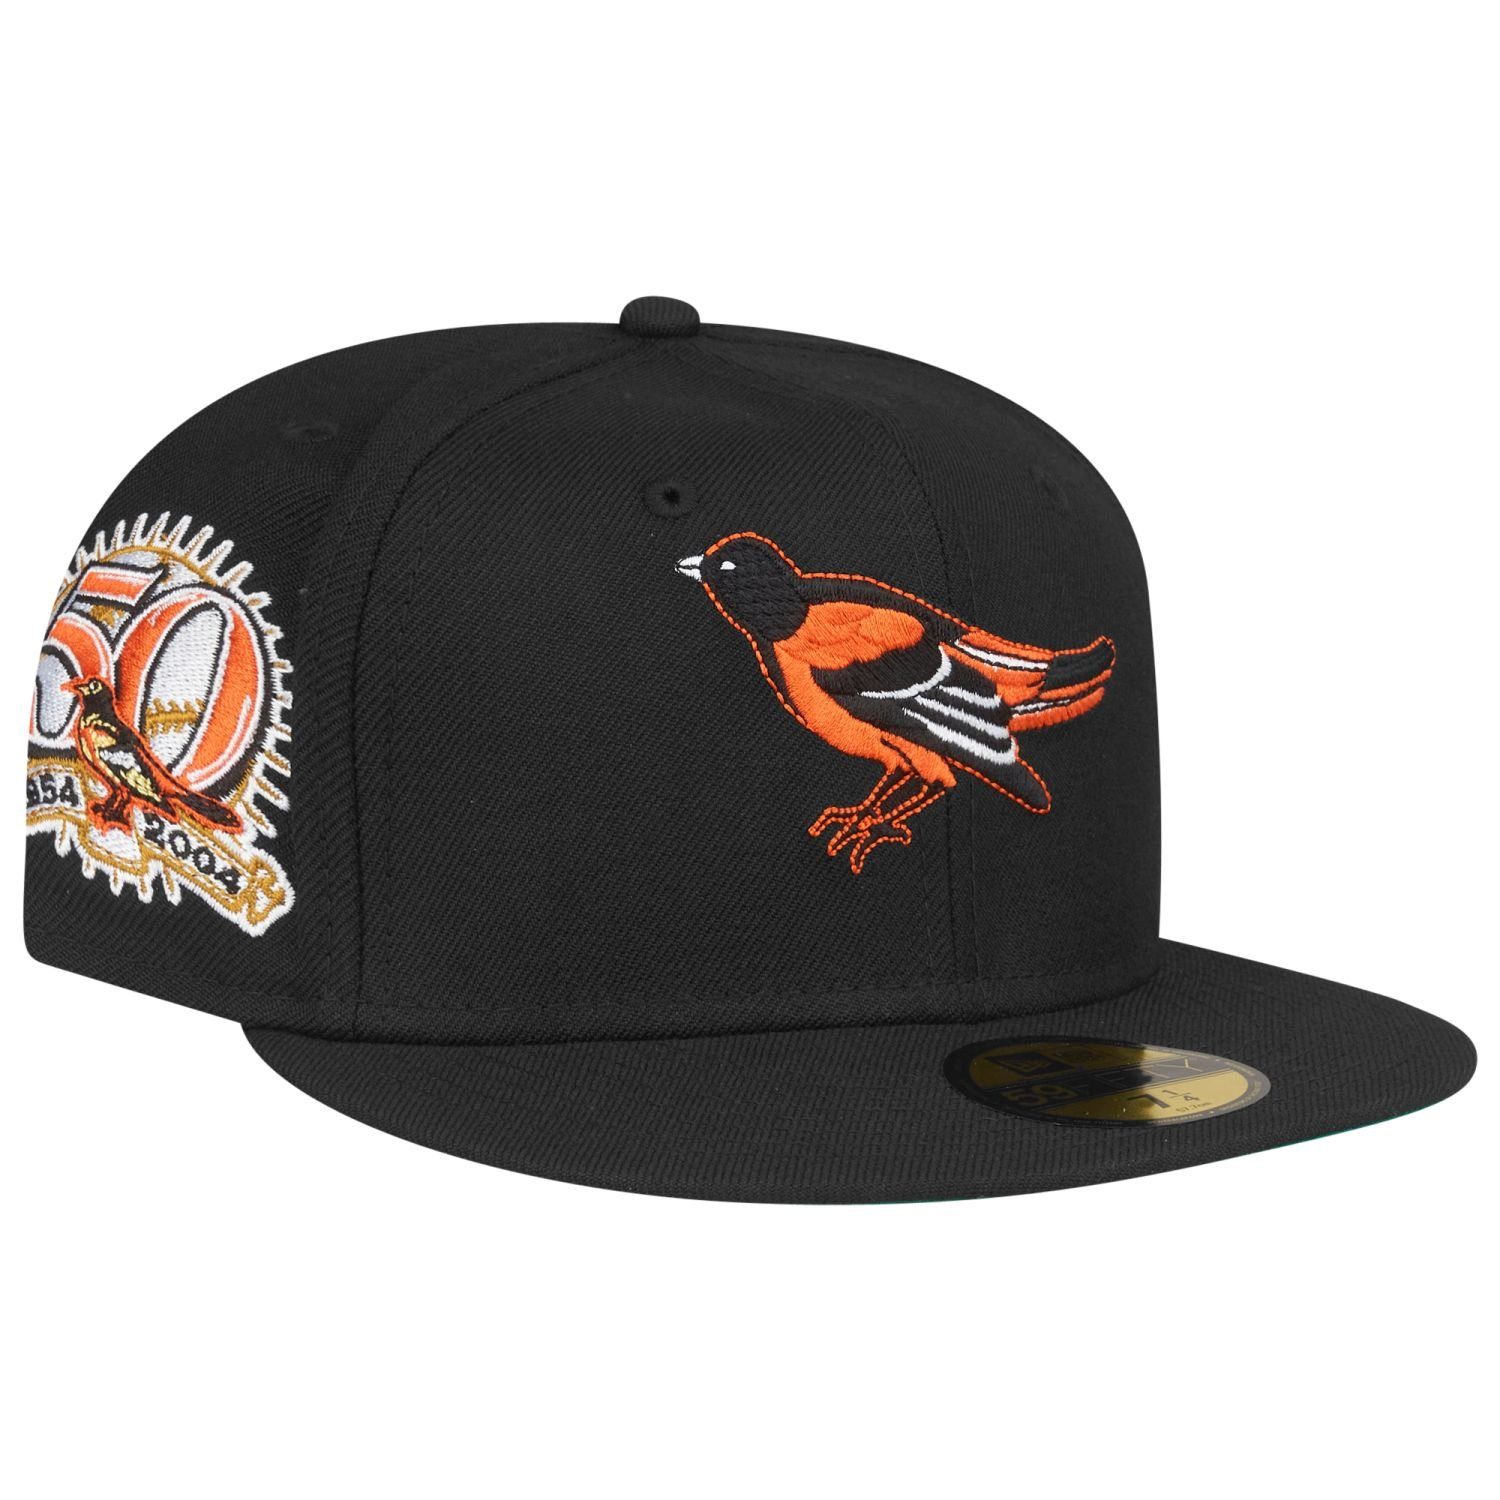 Fitted Baltimore Orioles COOPERSTOWN Cap New Era 59Fifty